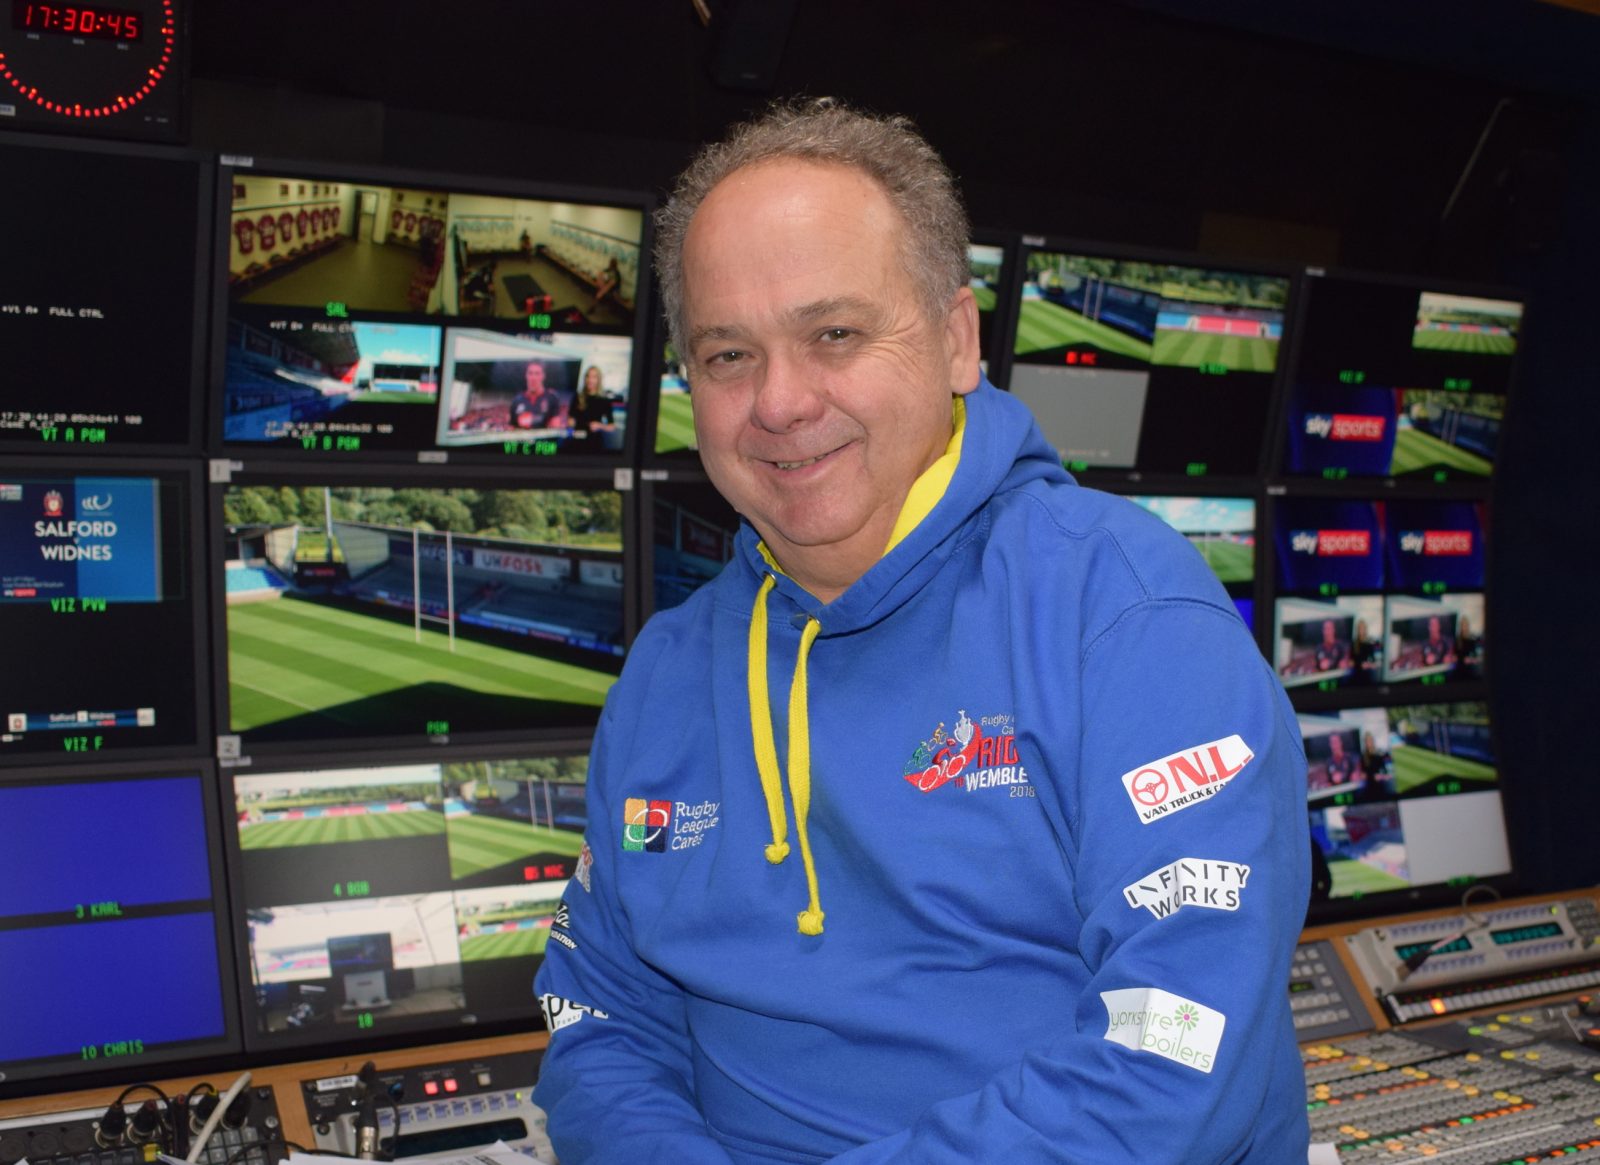 Sky Sports’ Rugby League supremo joins the Ride to Wembley